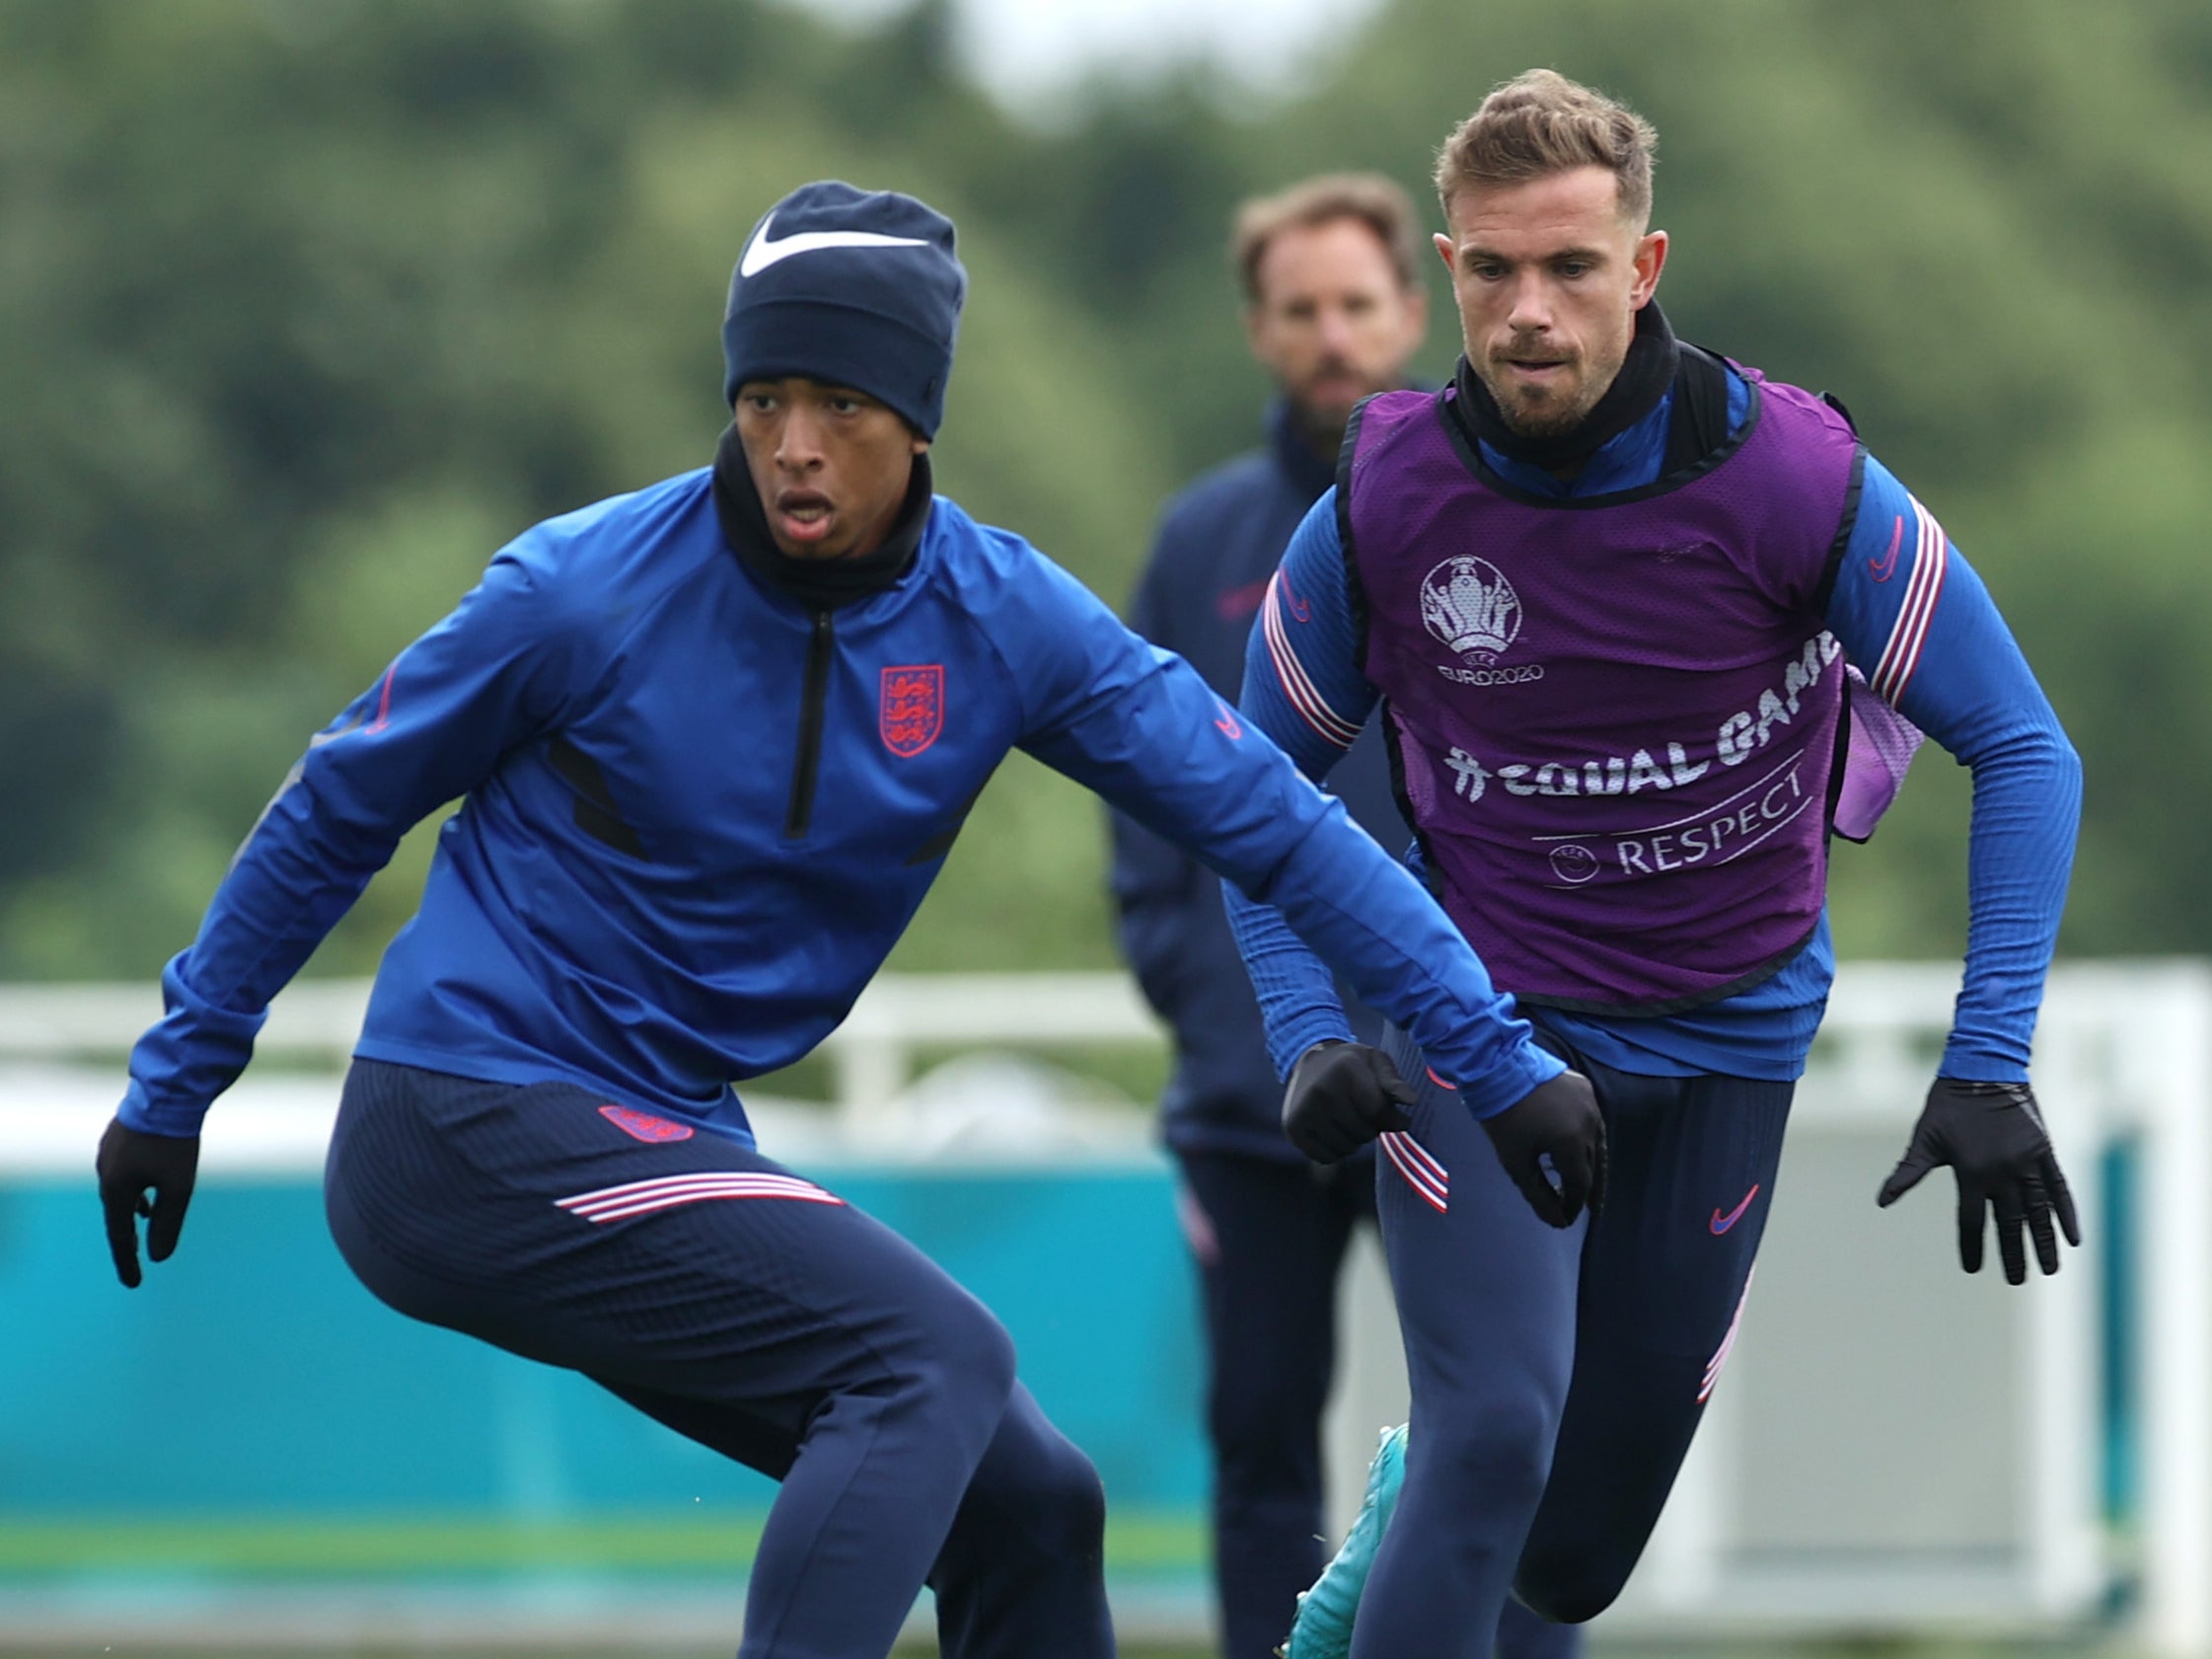 Jude Bellingham and Jordan Henderson in training with England at Euro 2020